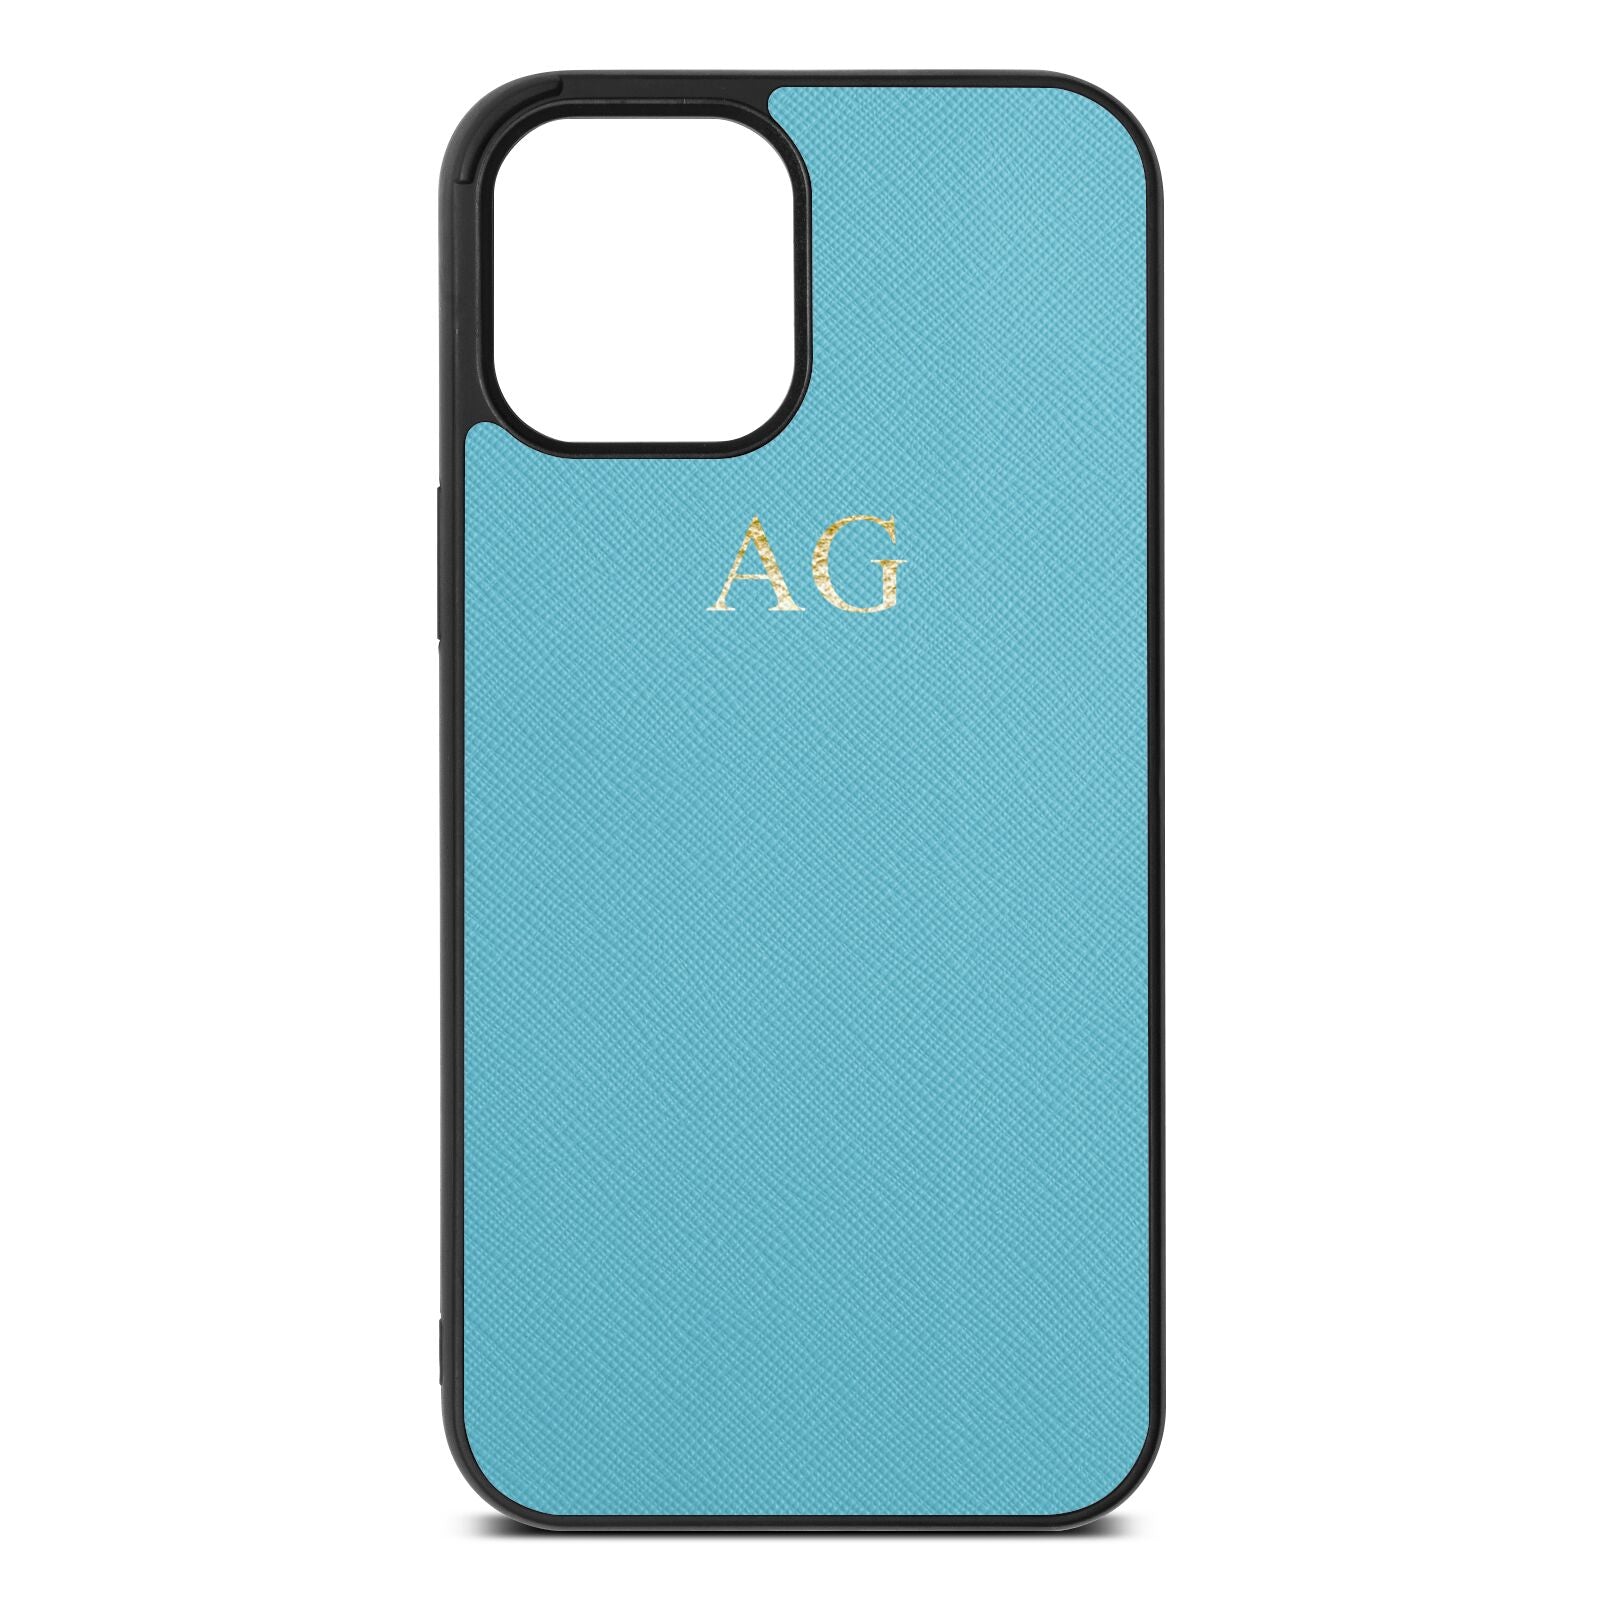 Personalised Sky Saffiano Leather iPhone 12 Pro Max Case